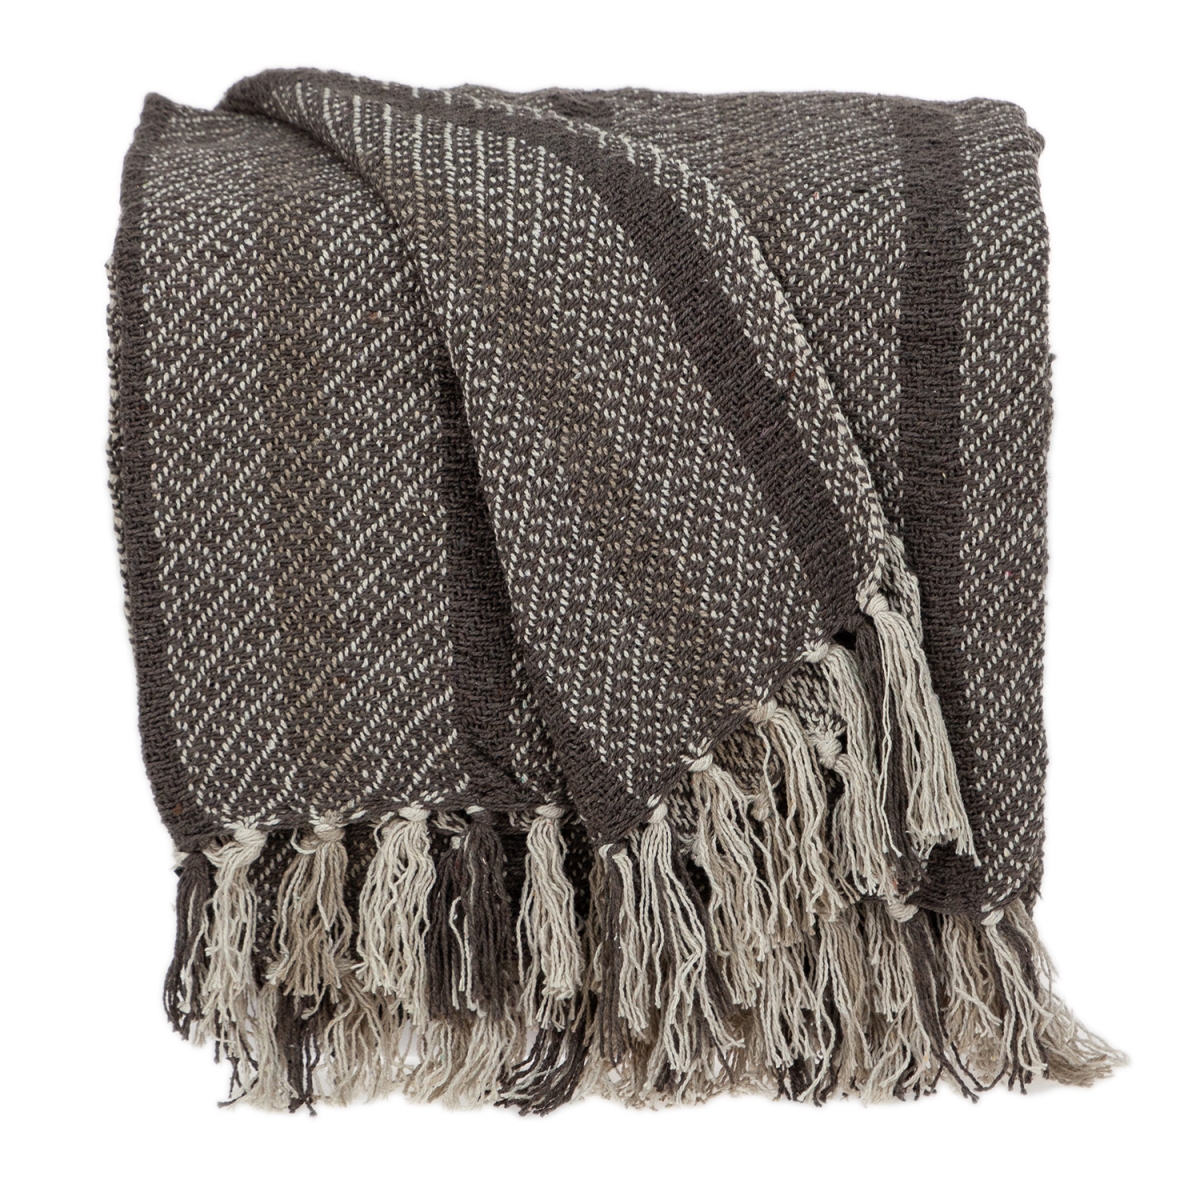 Picture of HomeRoots 476216 Brown & Taupe Striped Woven Handloom Throw